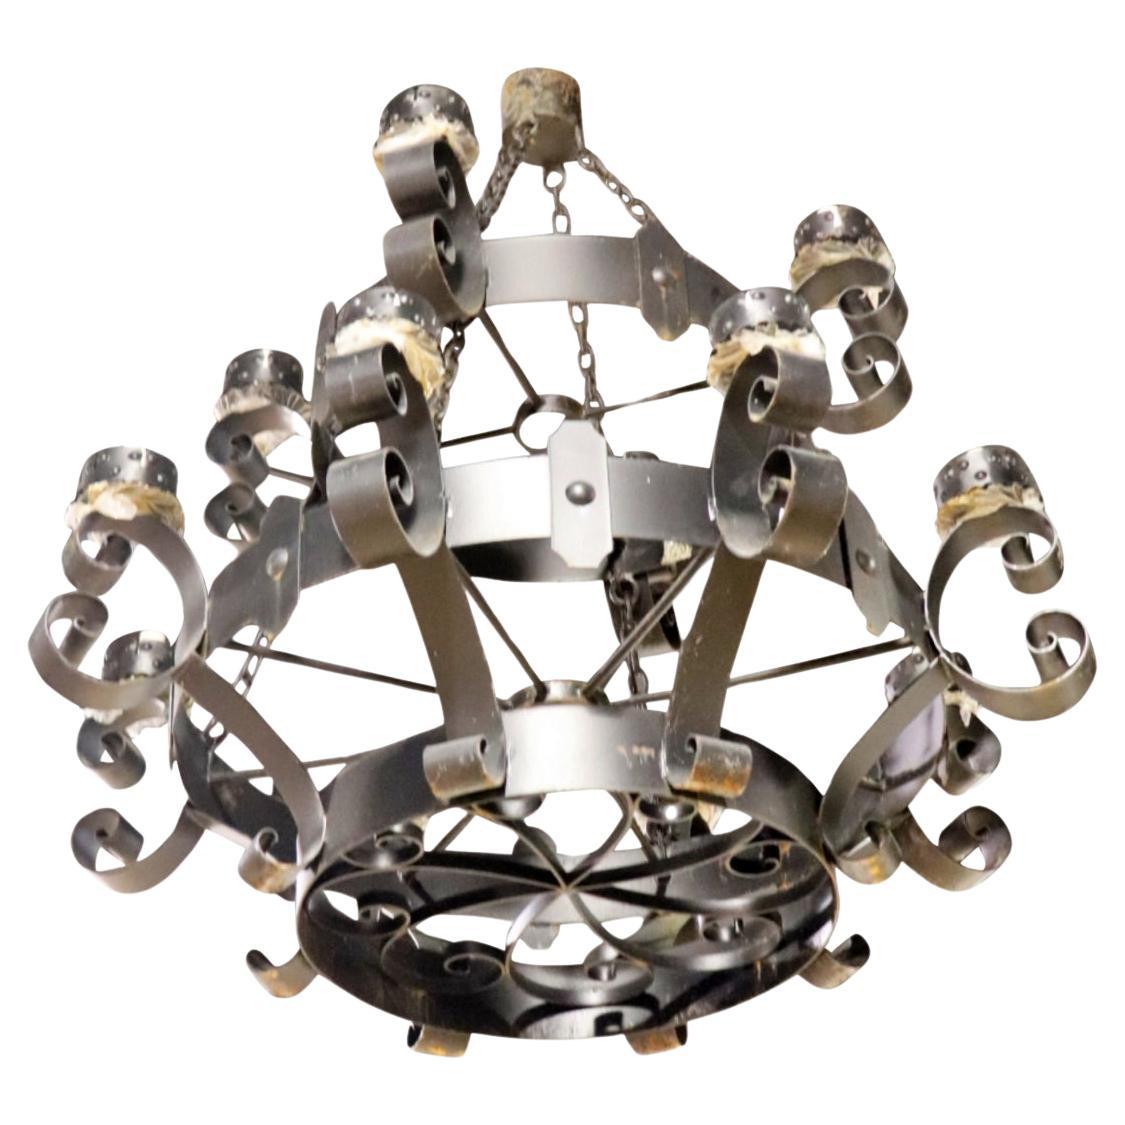 Monumental European Gothic Wrought Iron Black Gothic Chandelier 2 of 3 For Sale